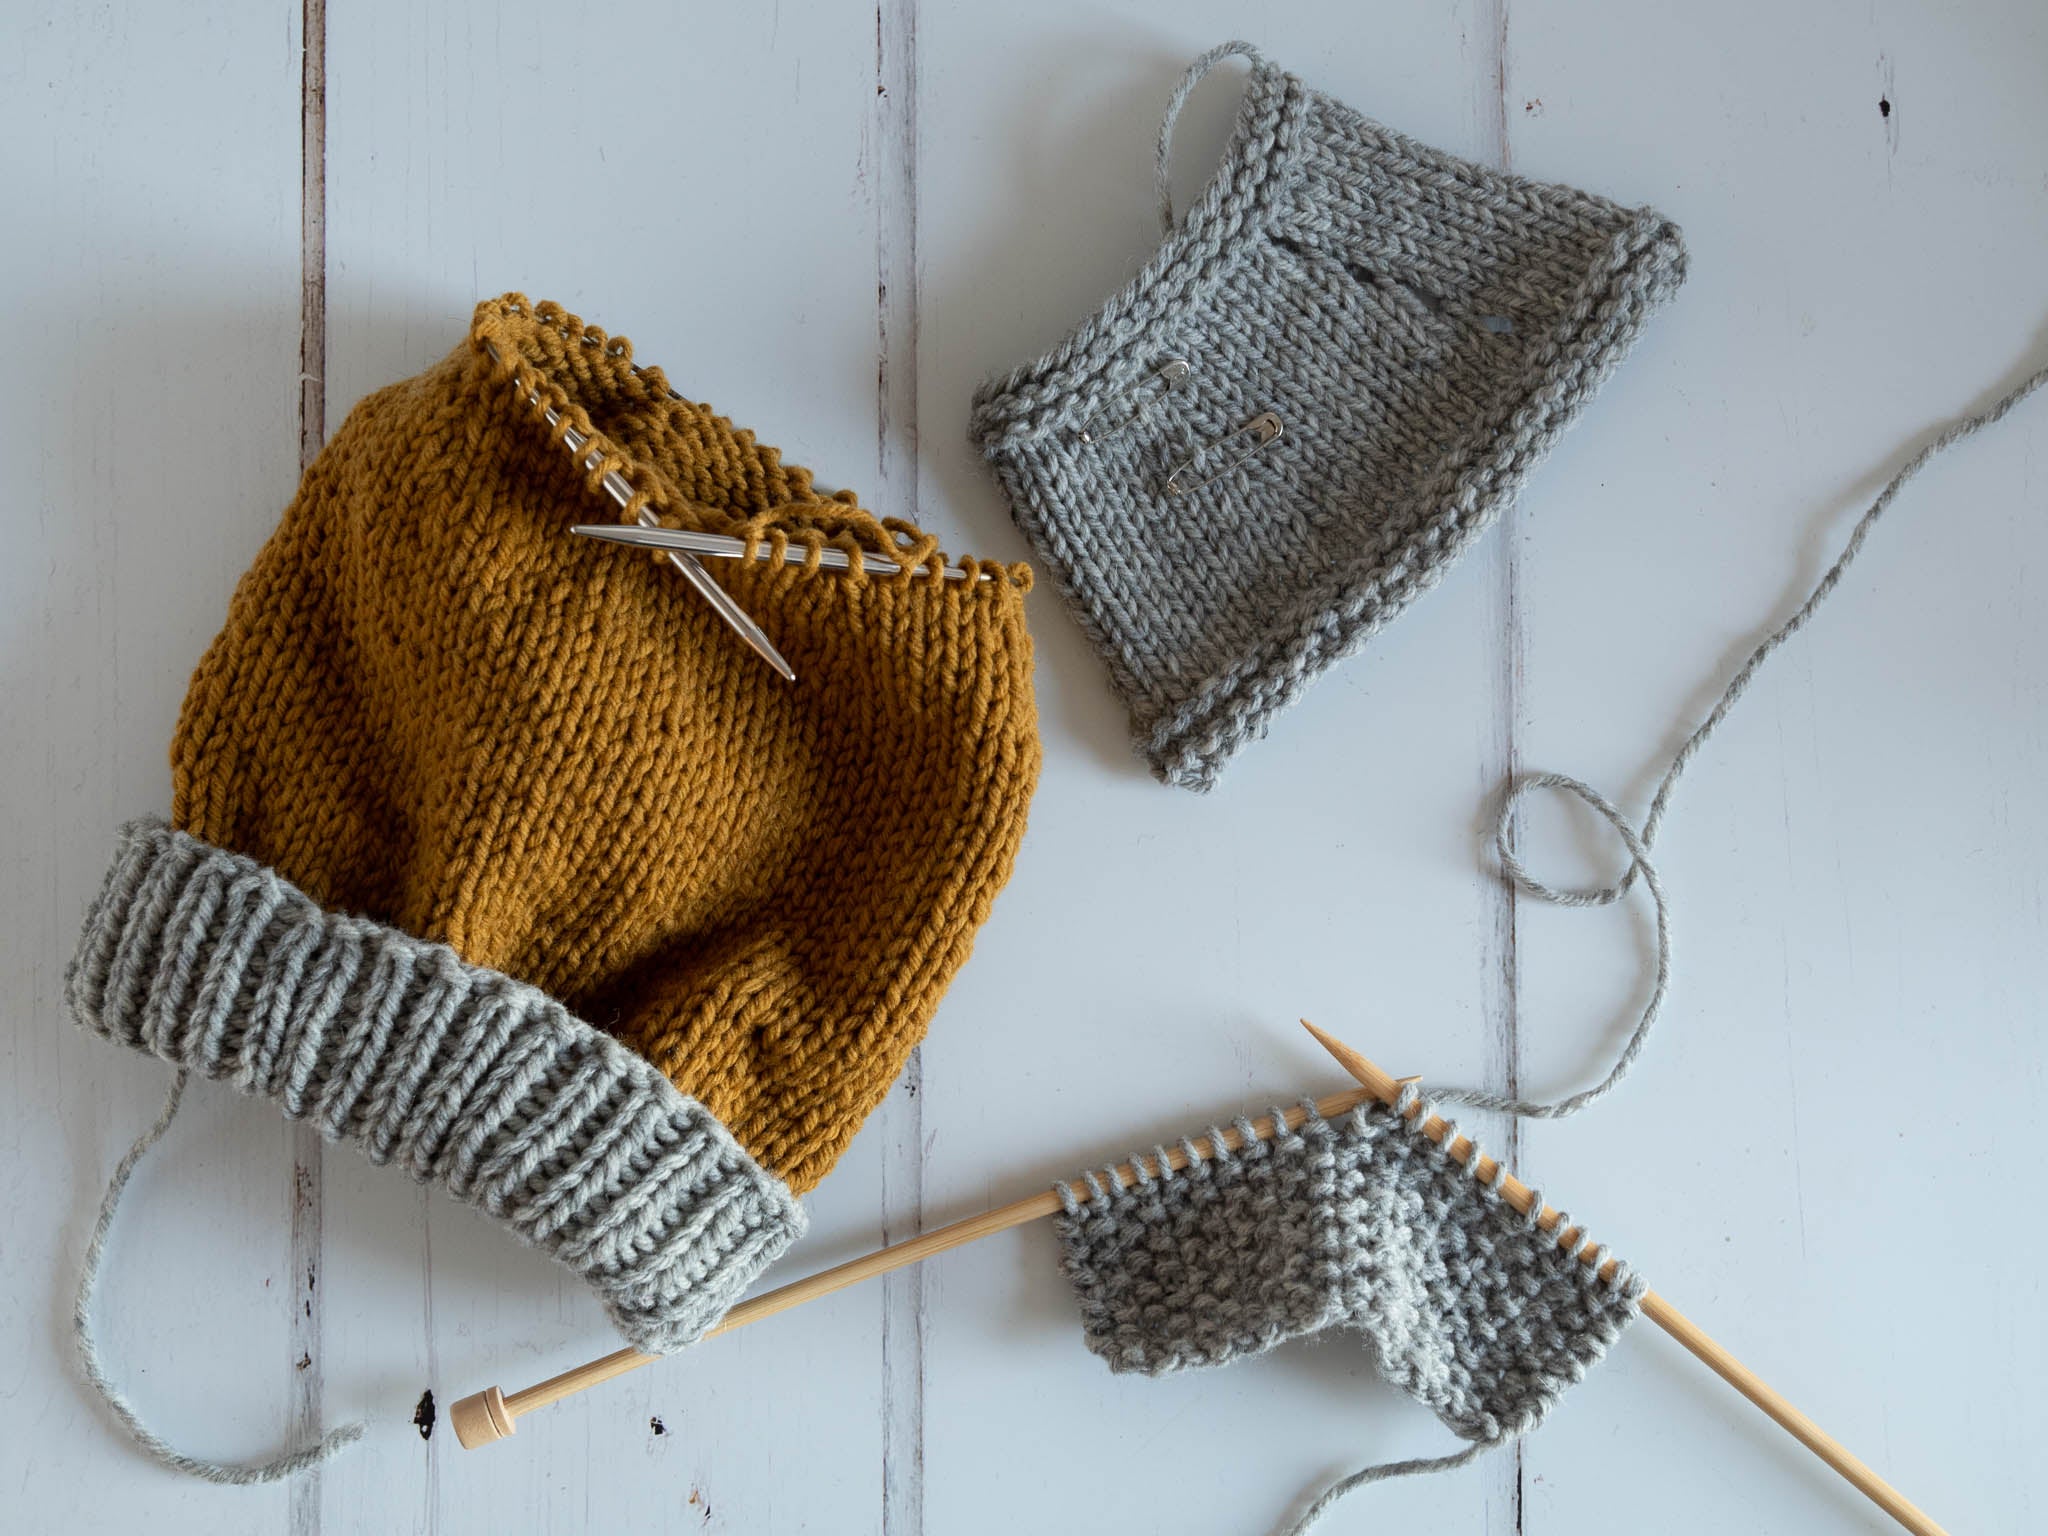 How to read your knitting - Ysolda